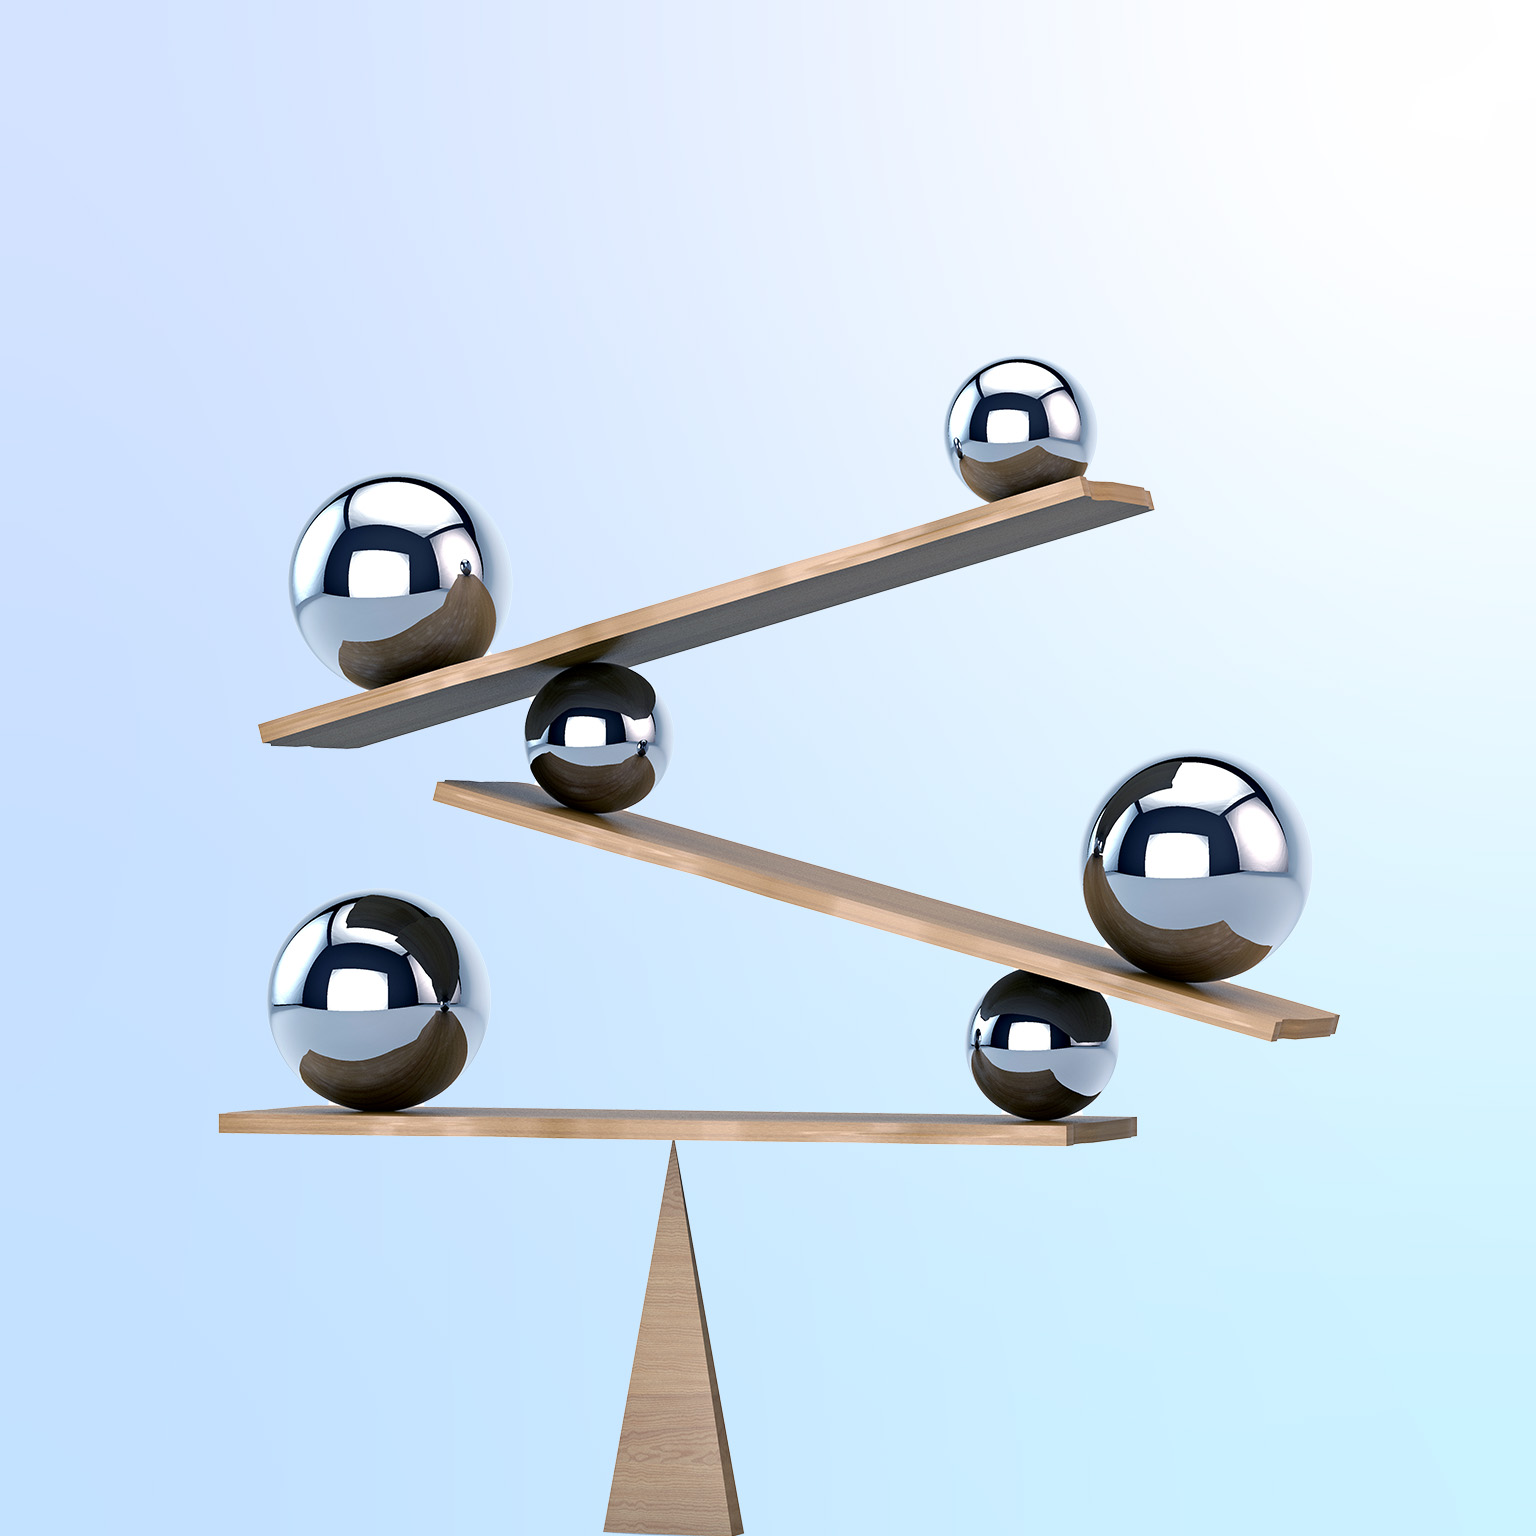 Multilayered balance board with multiple chrome spheres of different sizes creates a dynamic equilibrium.